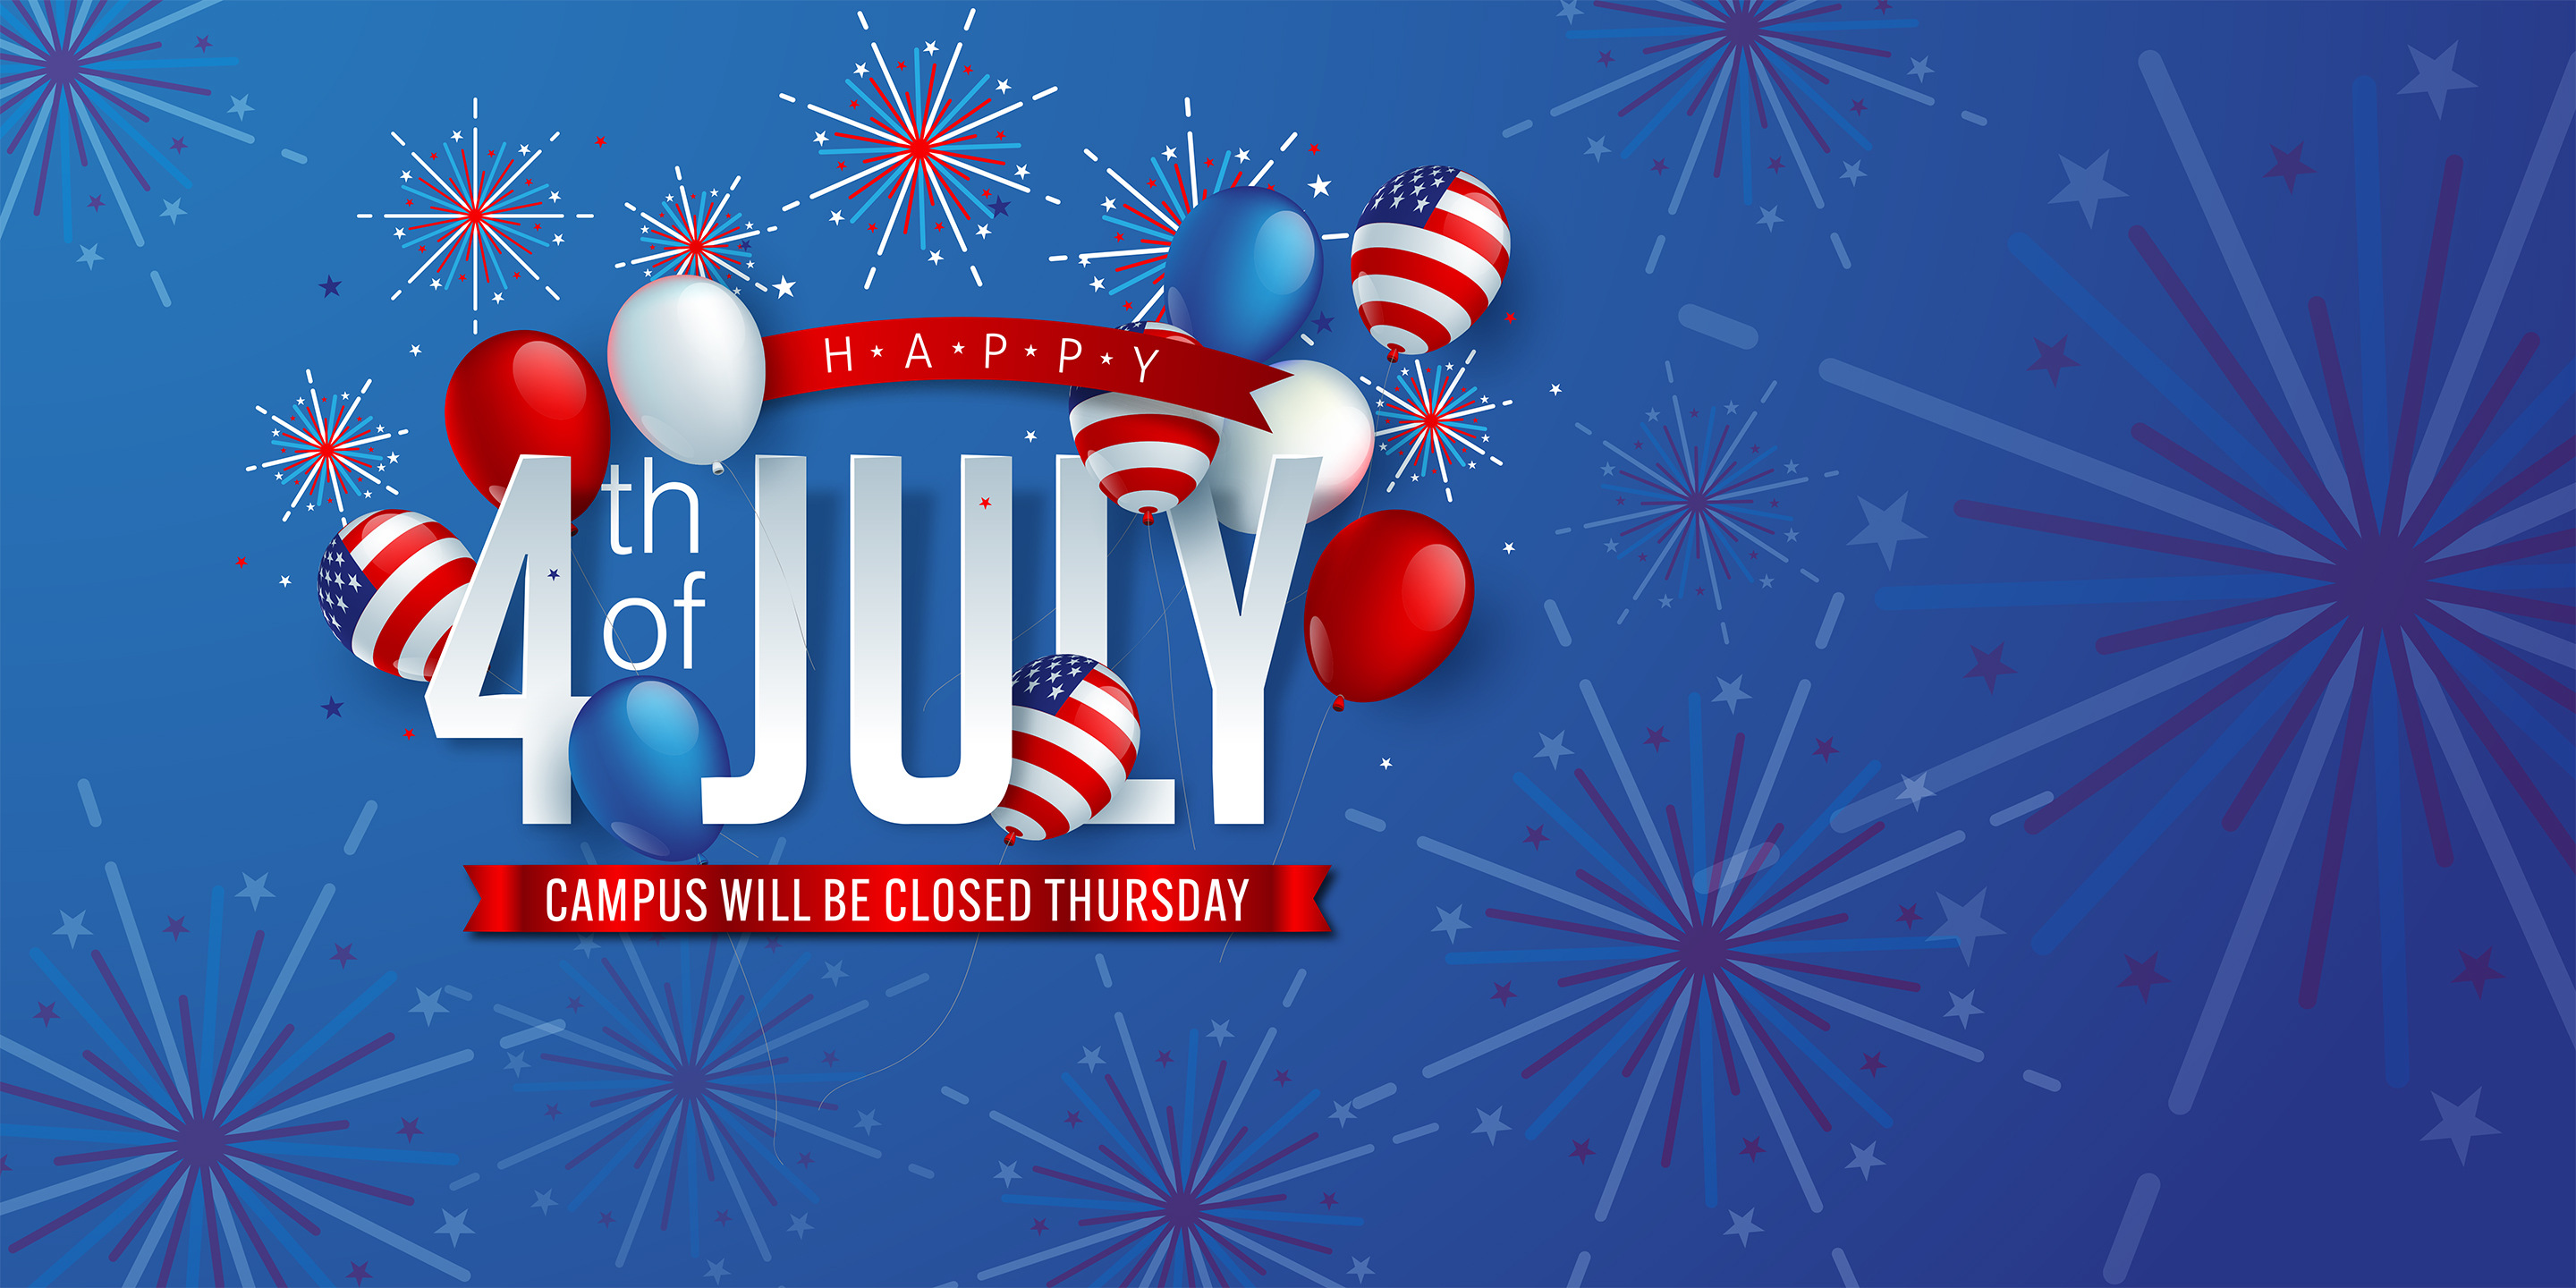 Happy 4th of July – Campus will be closed Thursday